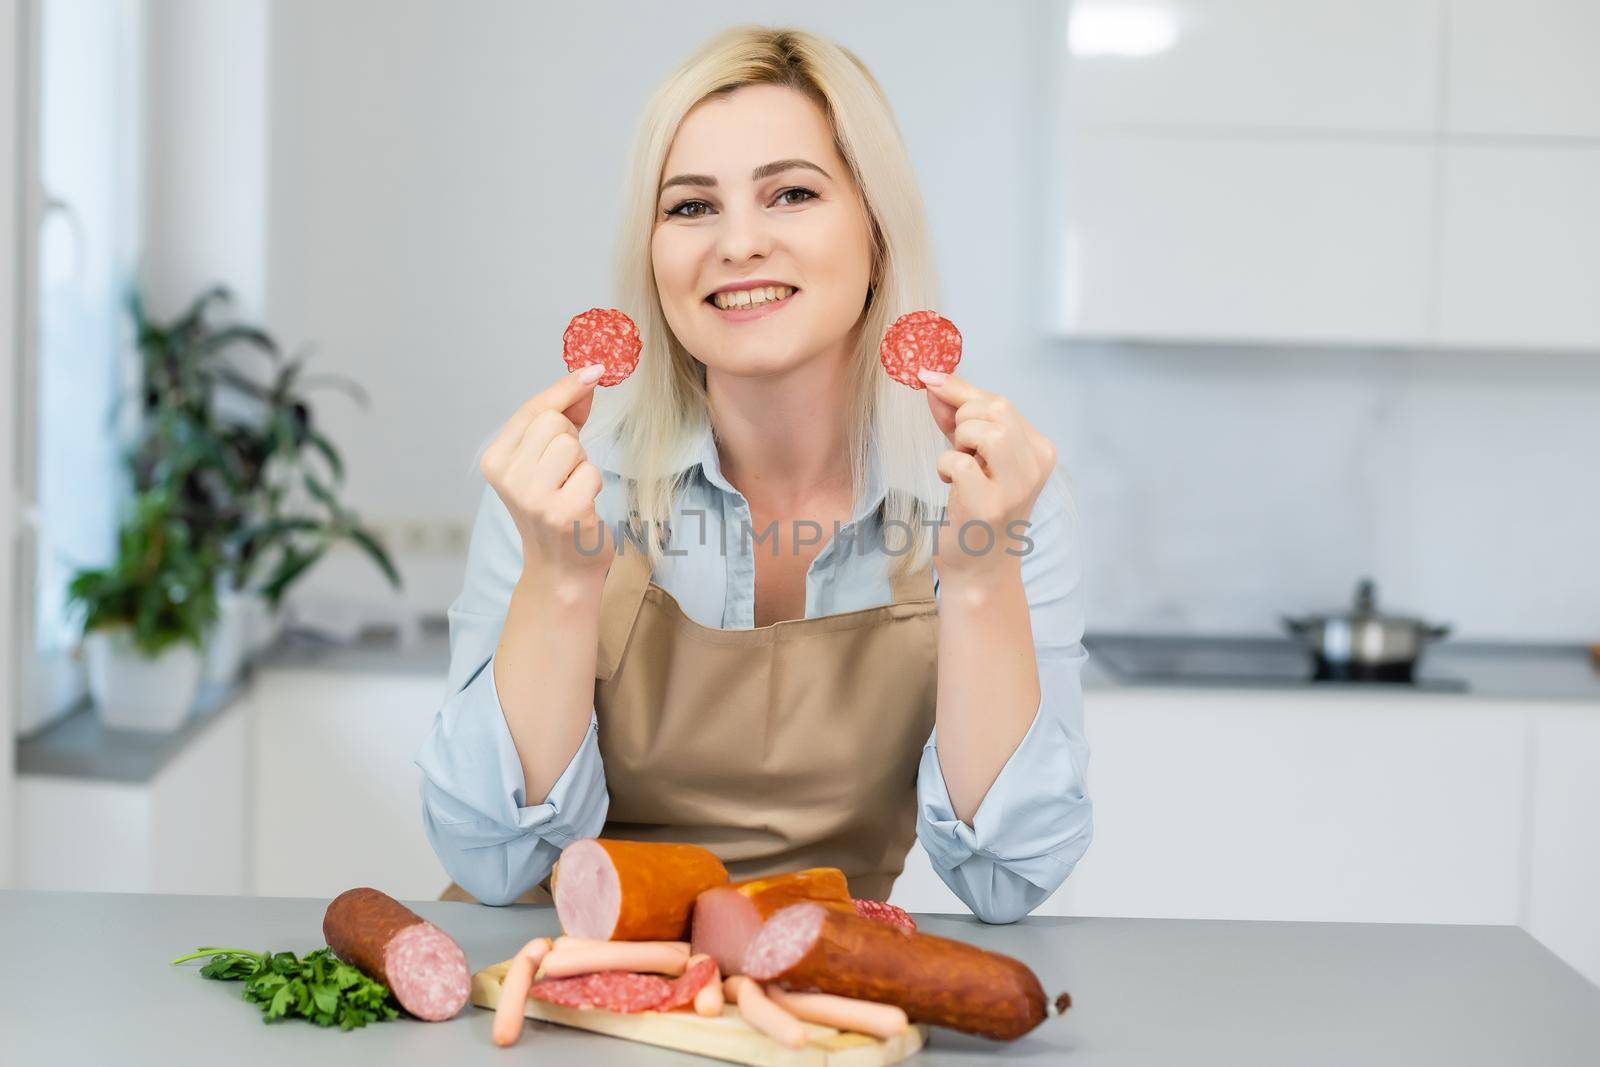 The girl is eating sausage. A piece of sausage. Smile and Joy. Business concept is the brand's appeal. Appetite